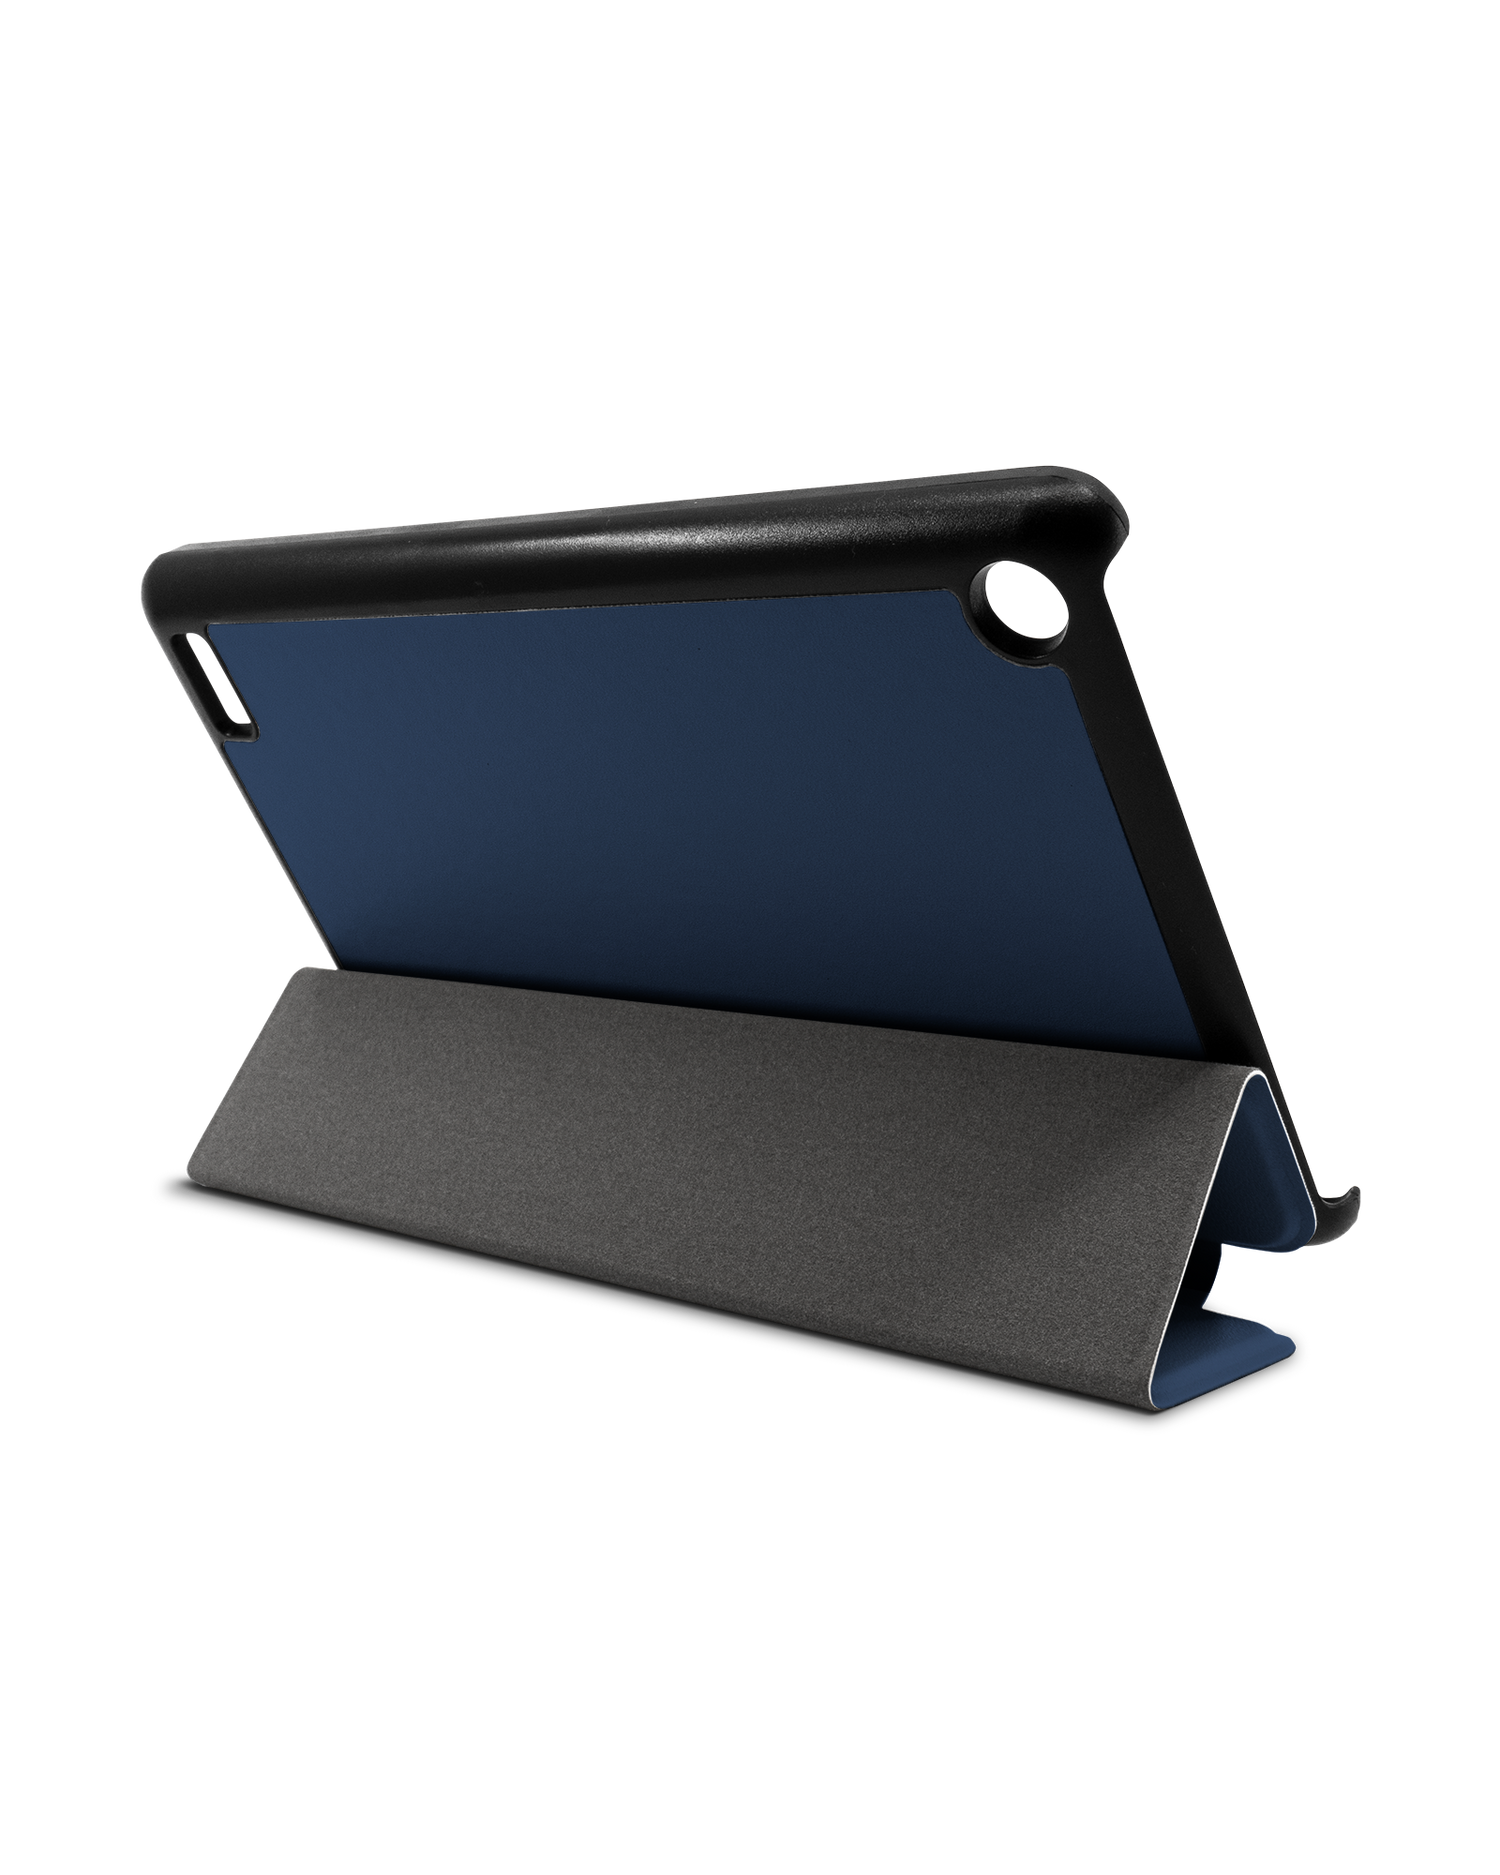 NAVY Tablet Smart Case for Amazon Fire 7: Used as Stand